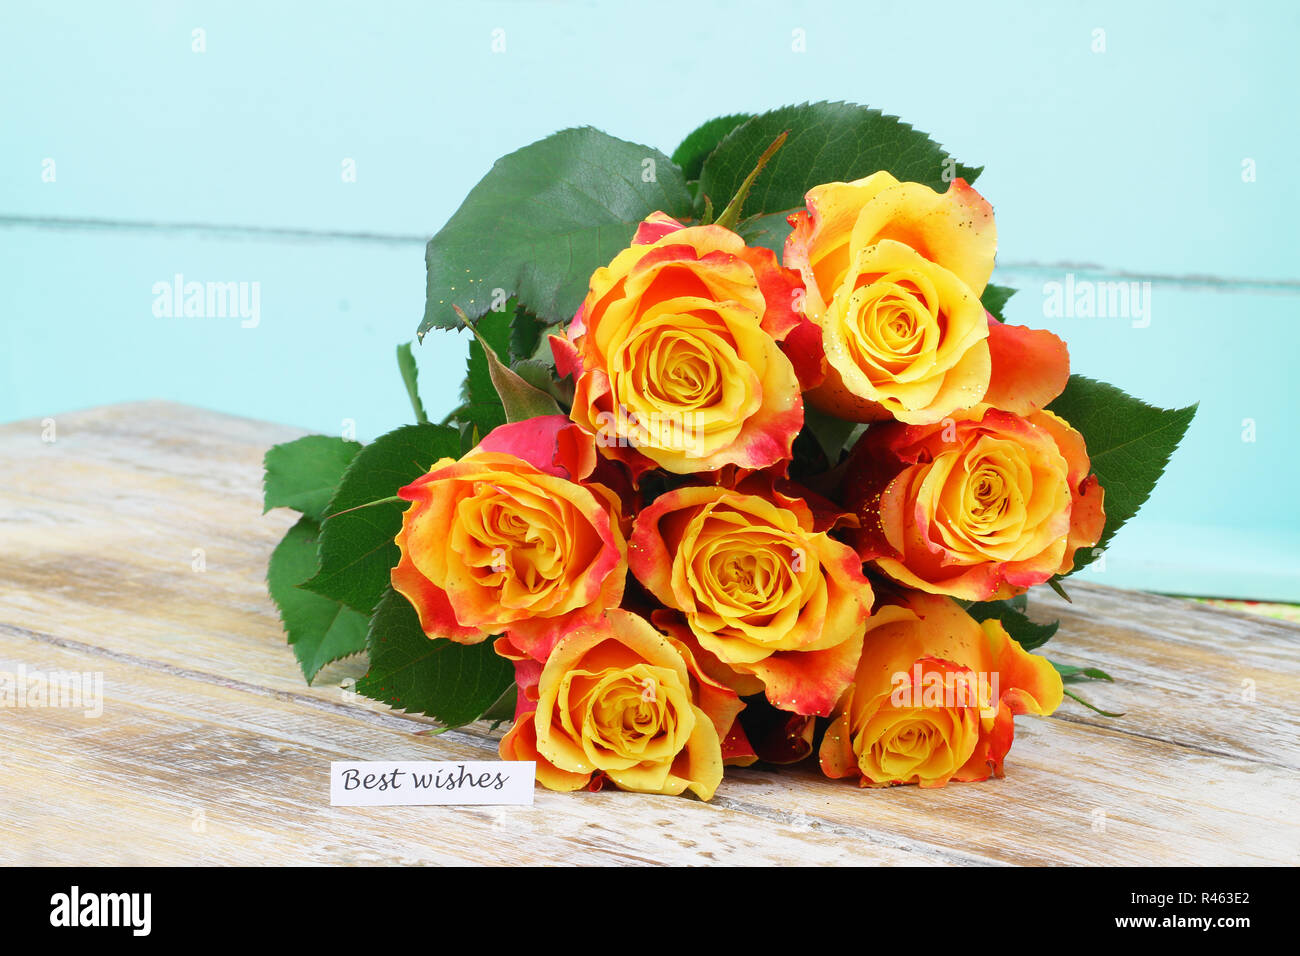 Best wishes card with colorful rose bouquet on rustic wooden surface Stock Photo